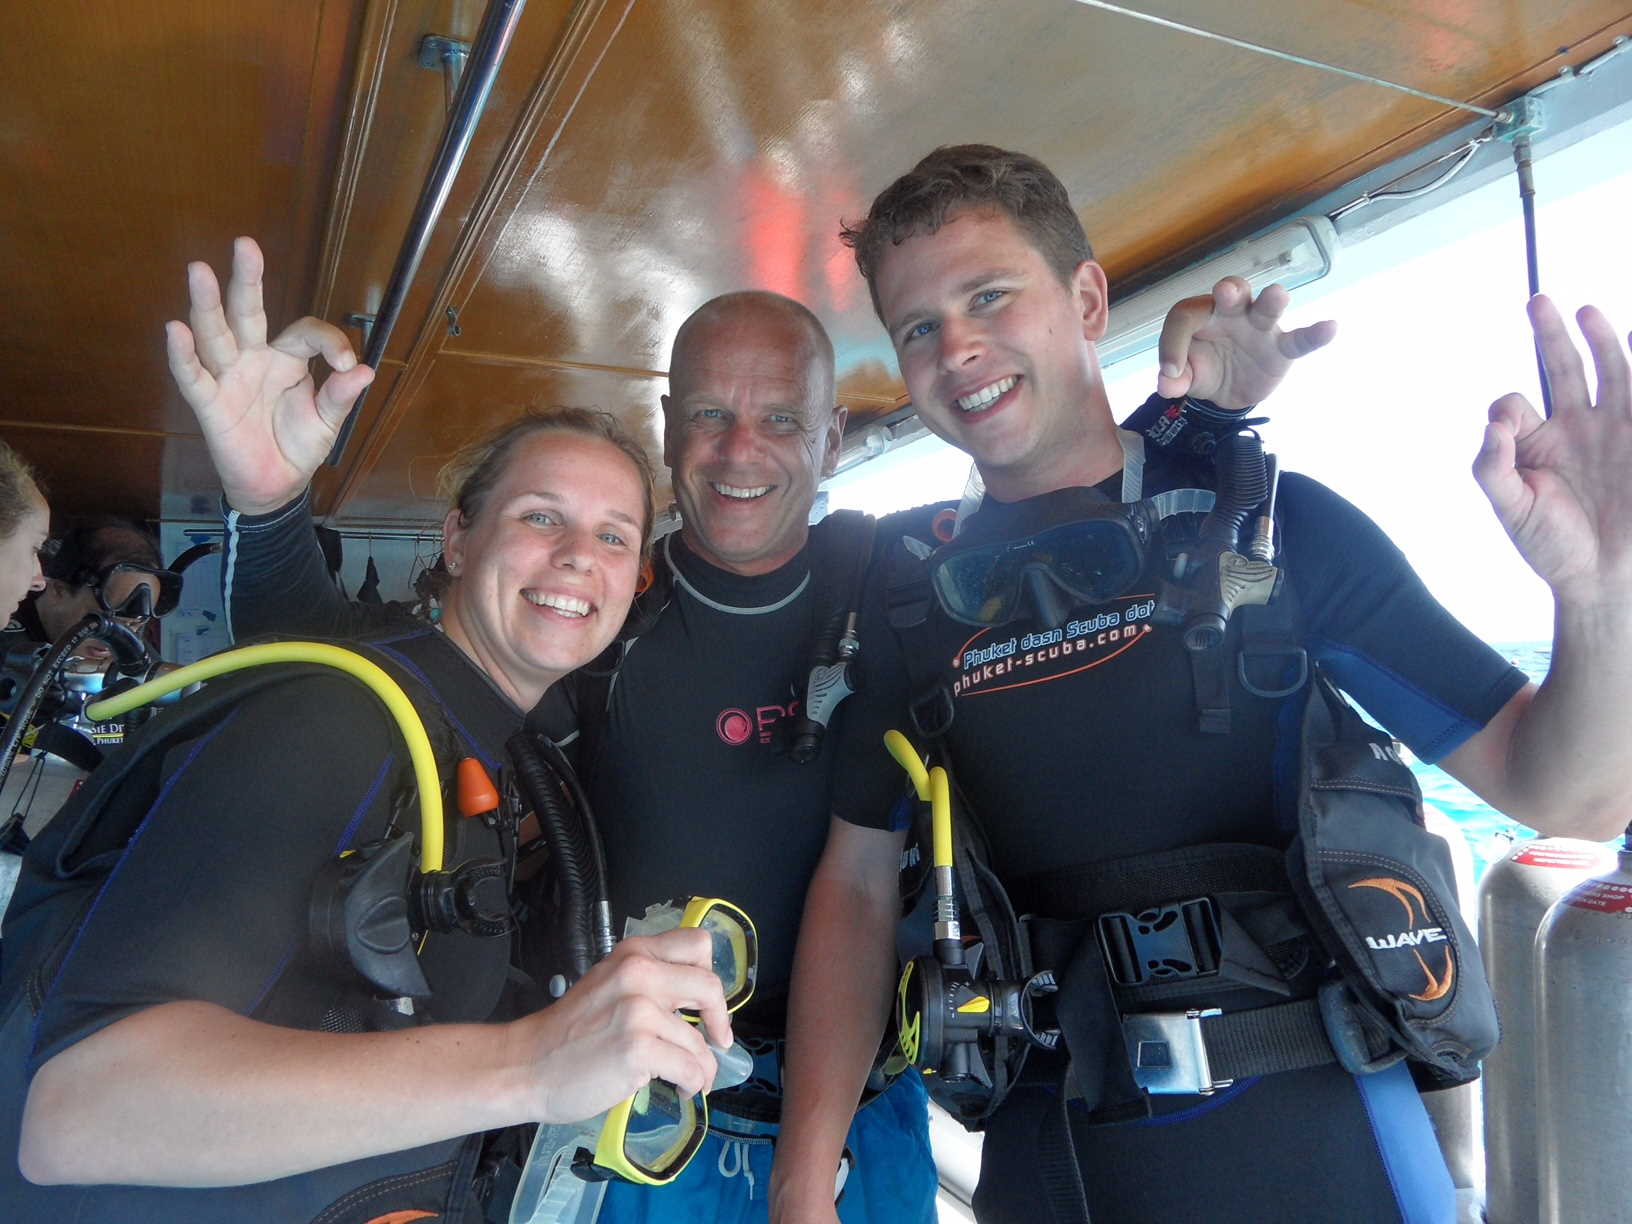 Steven with open water students on the Phuket dash Scuba diveboat.